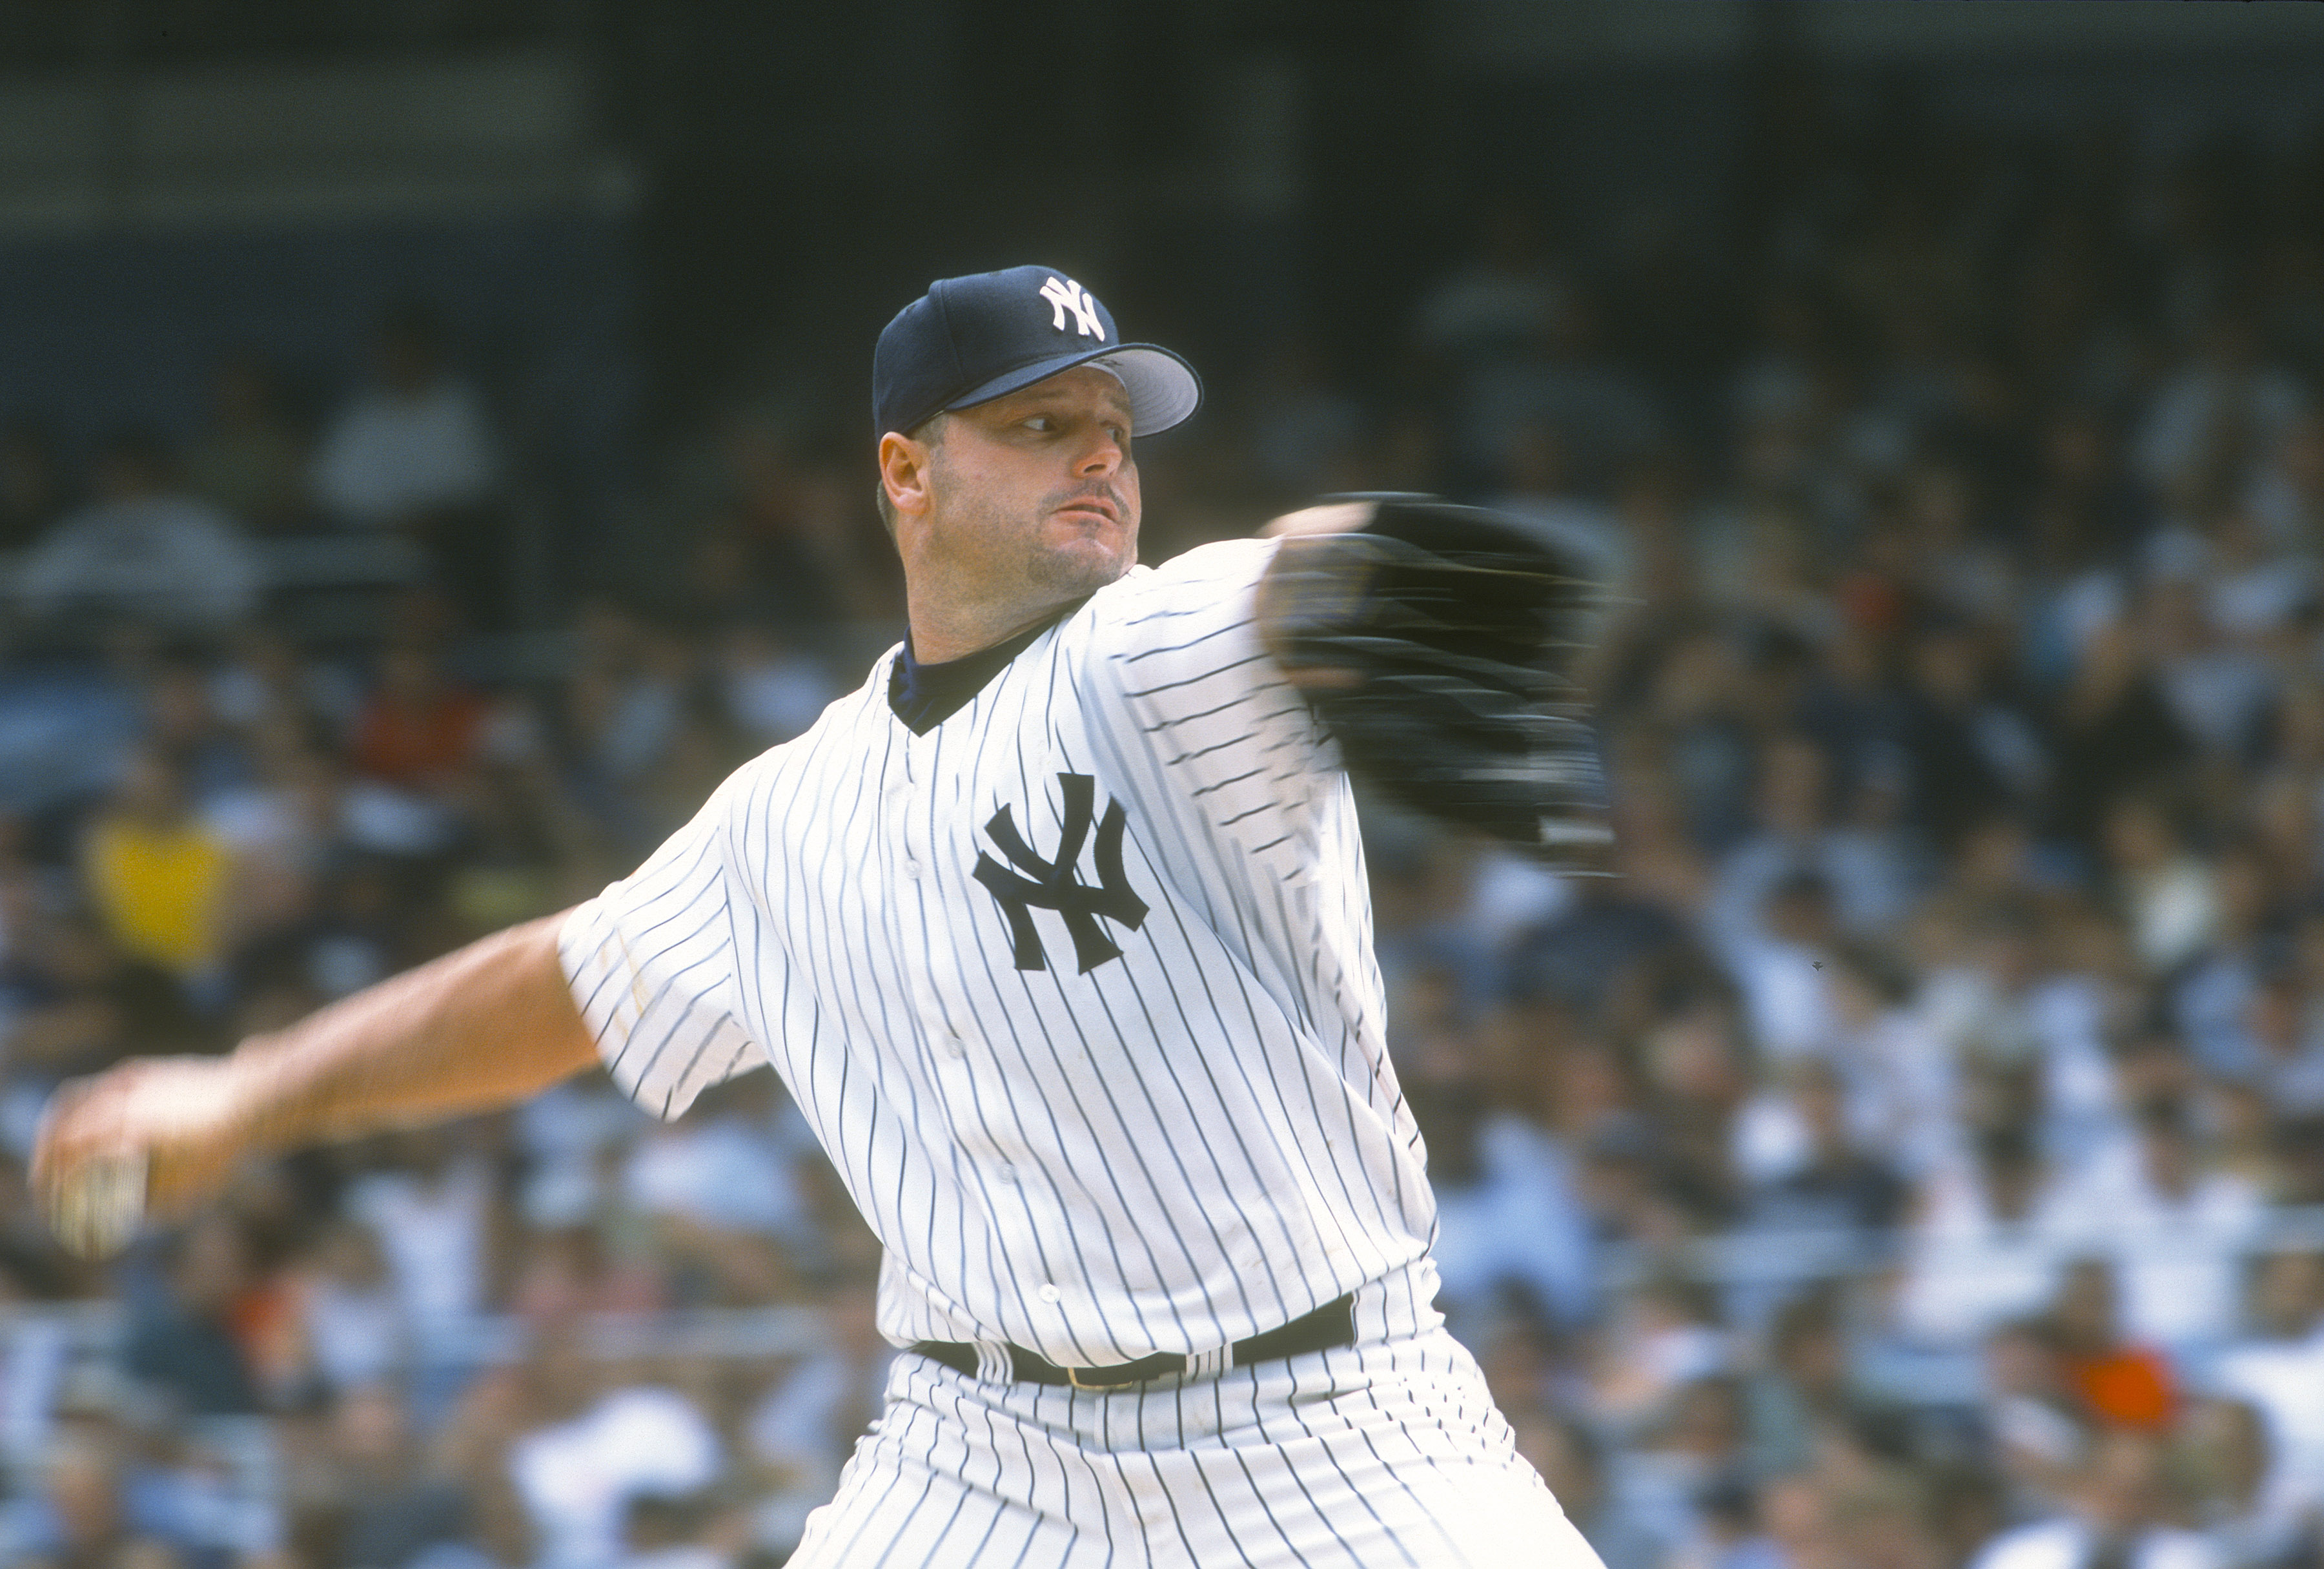 Roger Clemens 'not going to lose sleep' over Hall of Fame snub